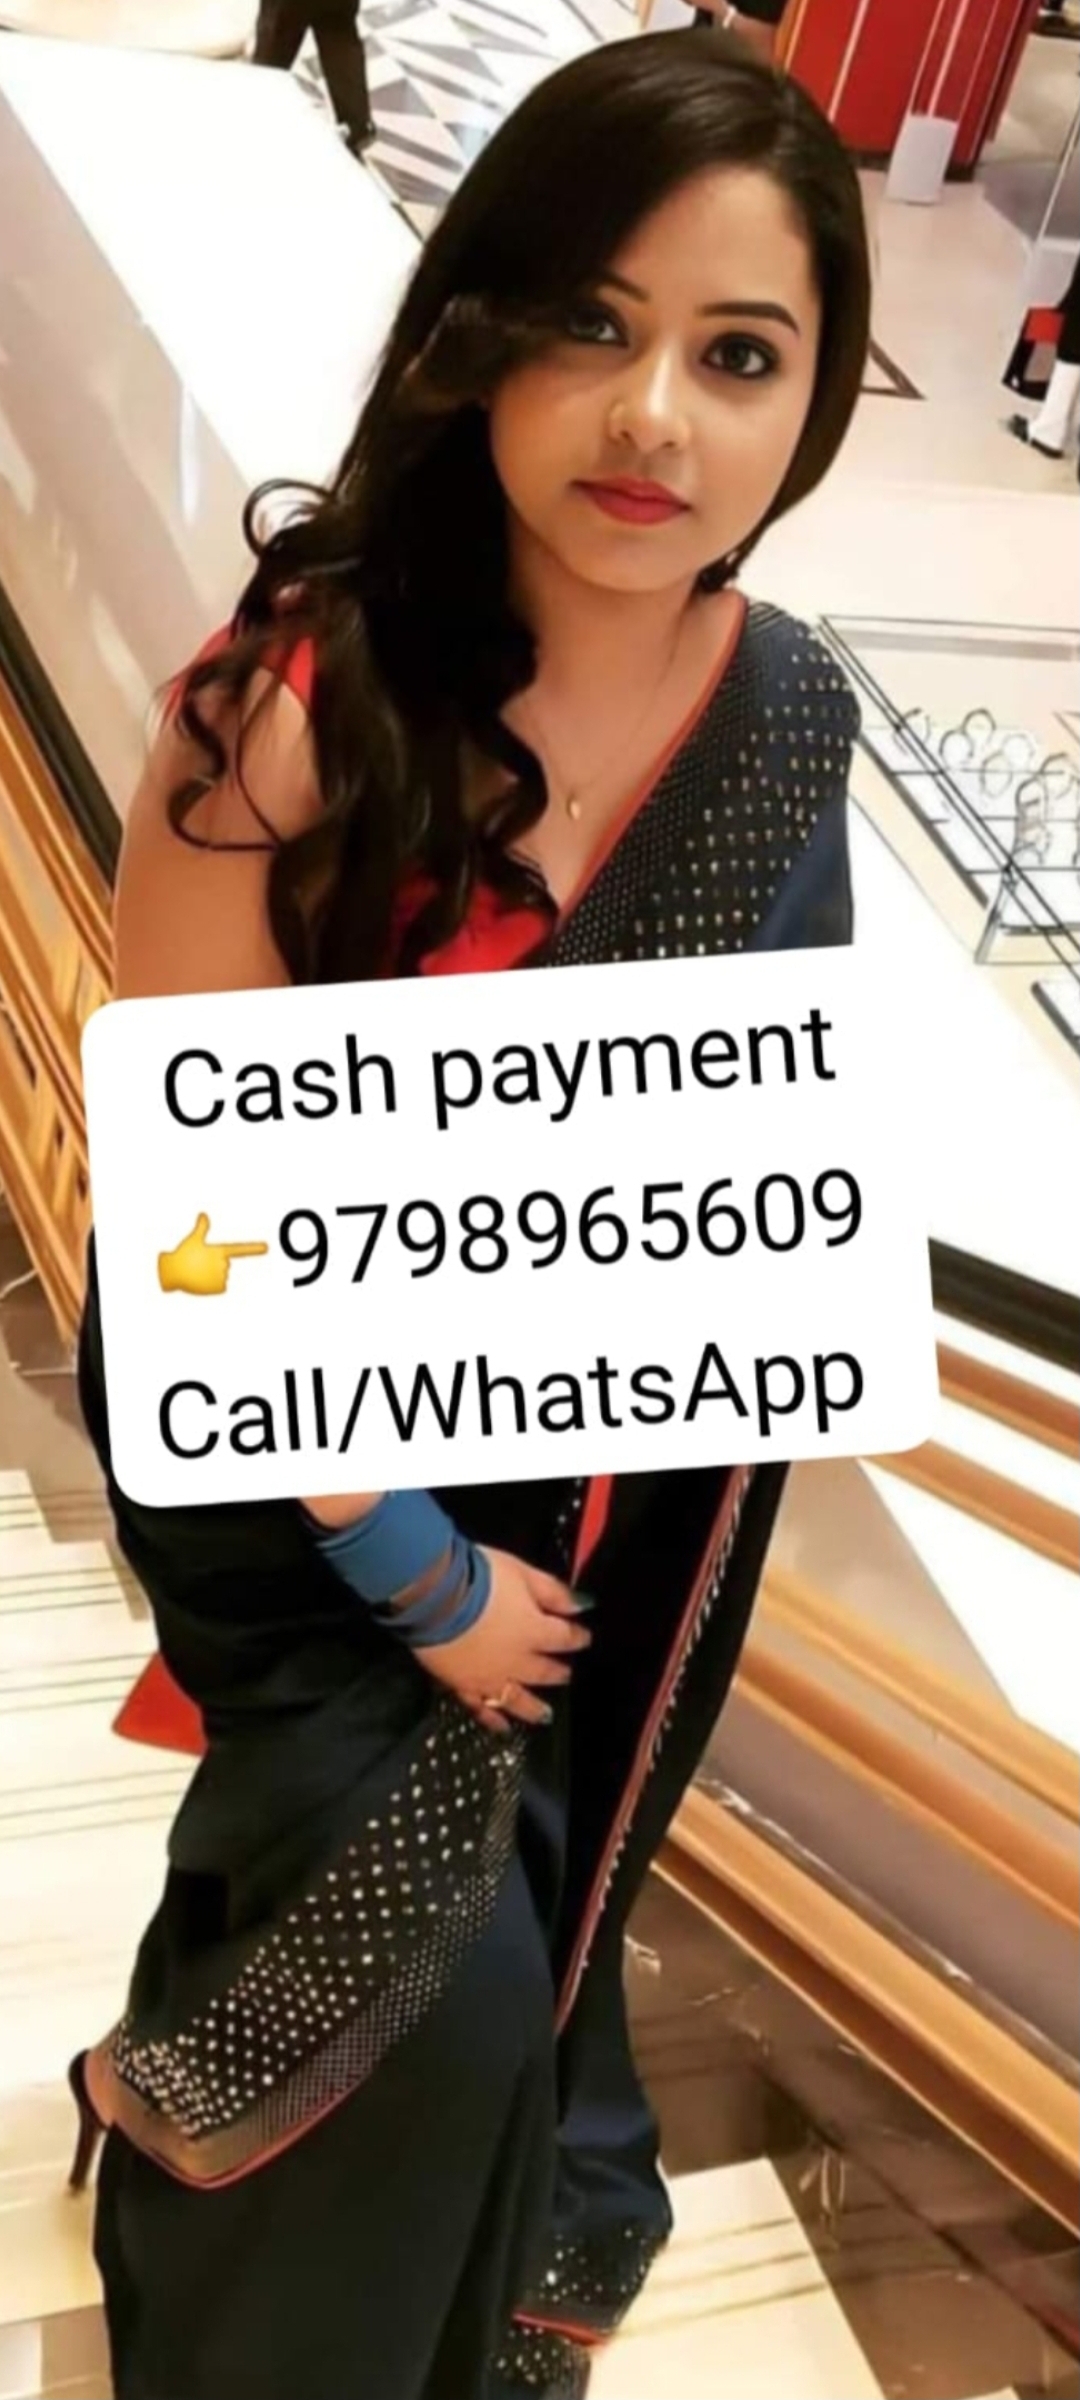 Jalgaon in call girl VIP model anytime available 